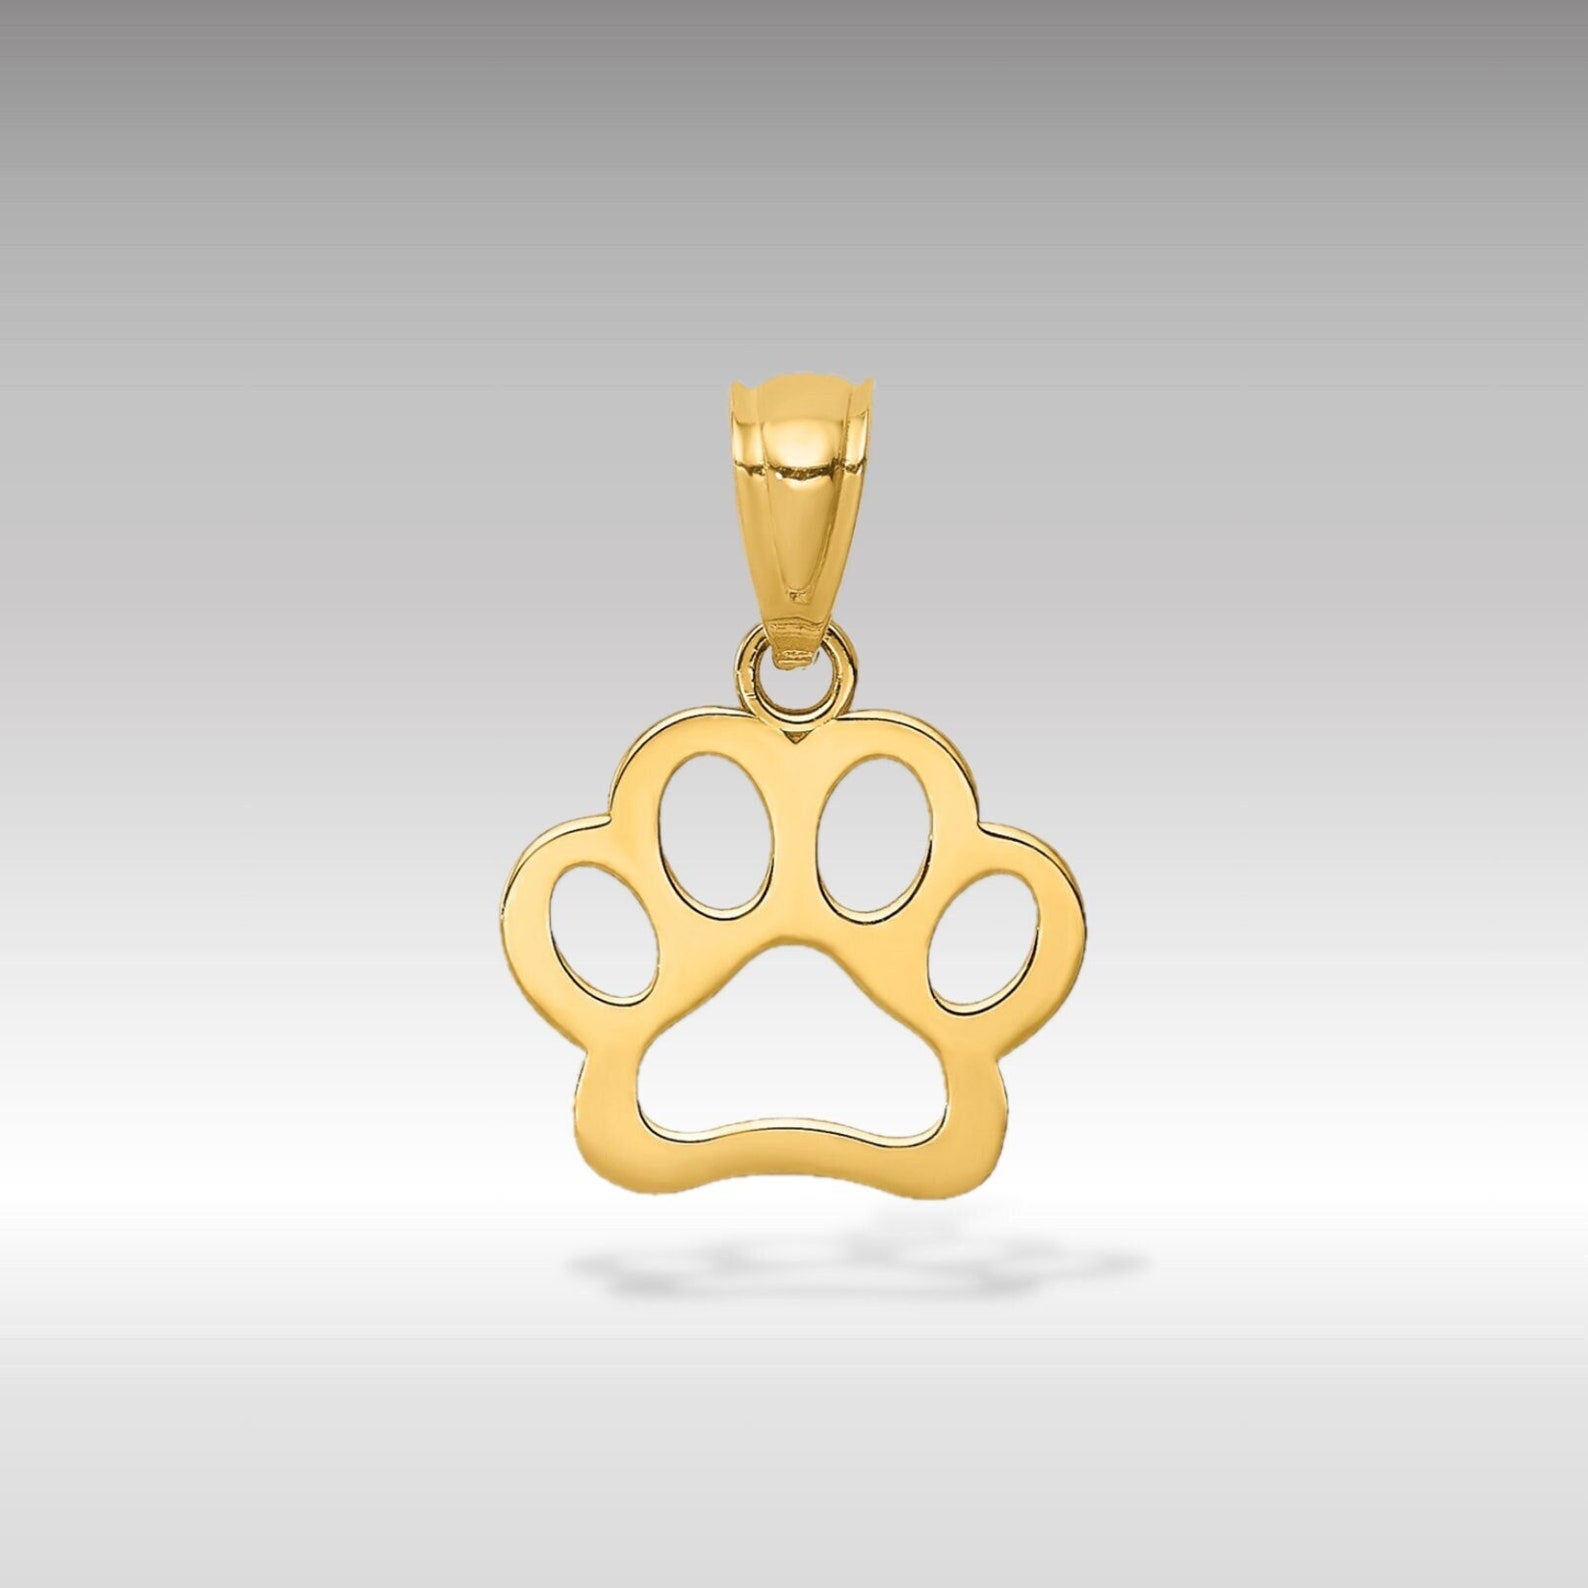 Gold Dog Paw Pendant - Charlie & Co. Jewelry